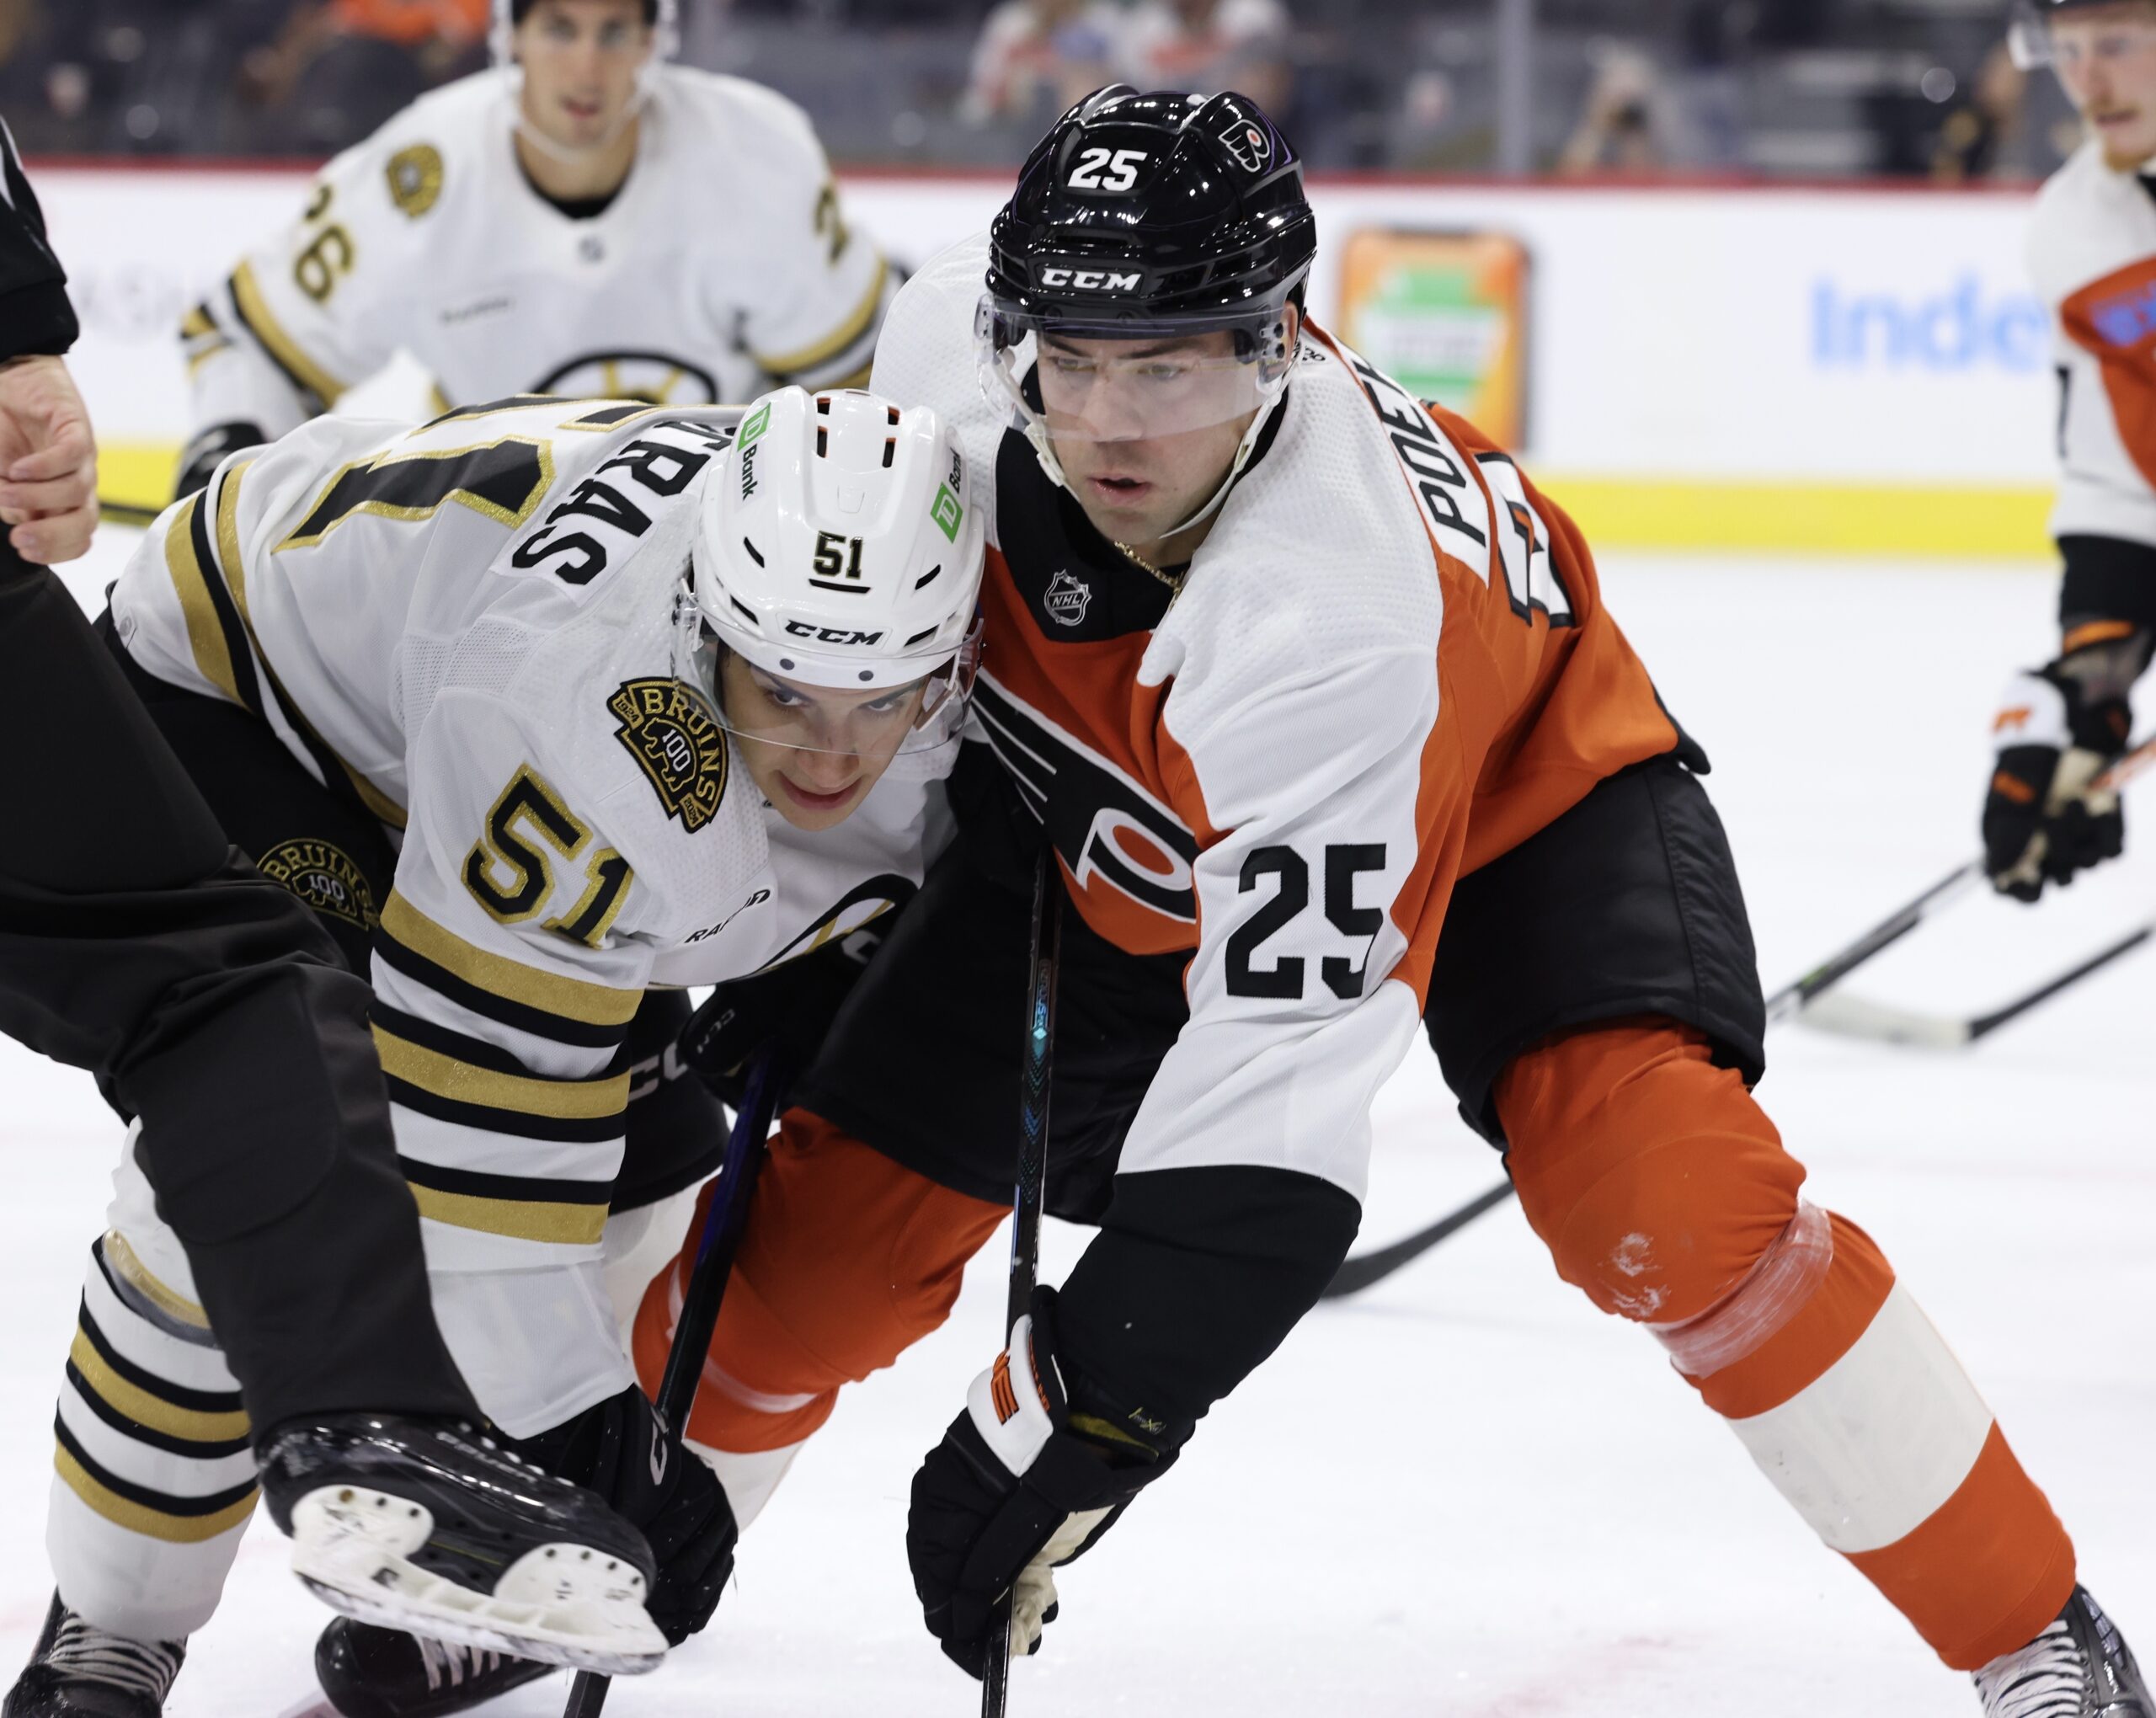 Flyers must claim this 2019 first-round pick on waivers